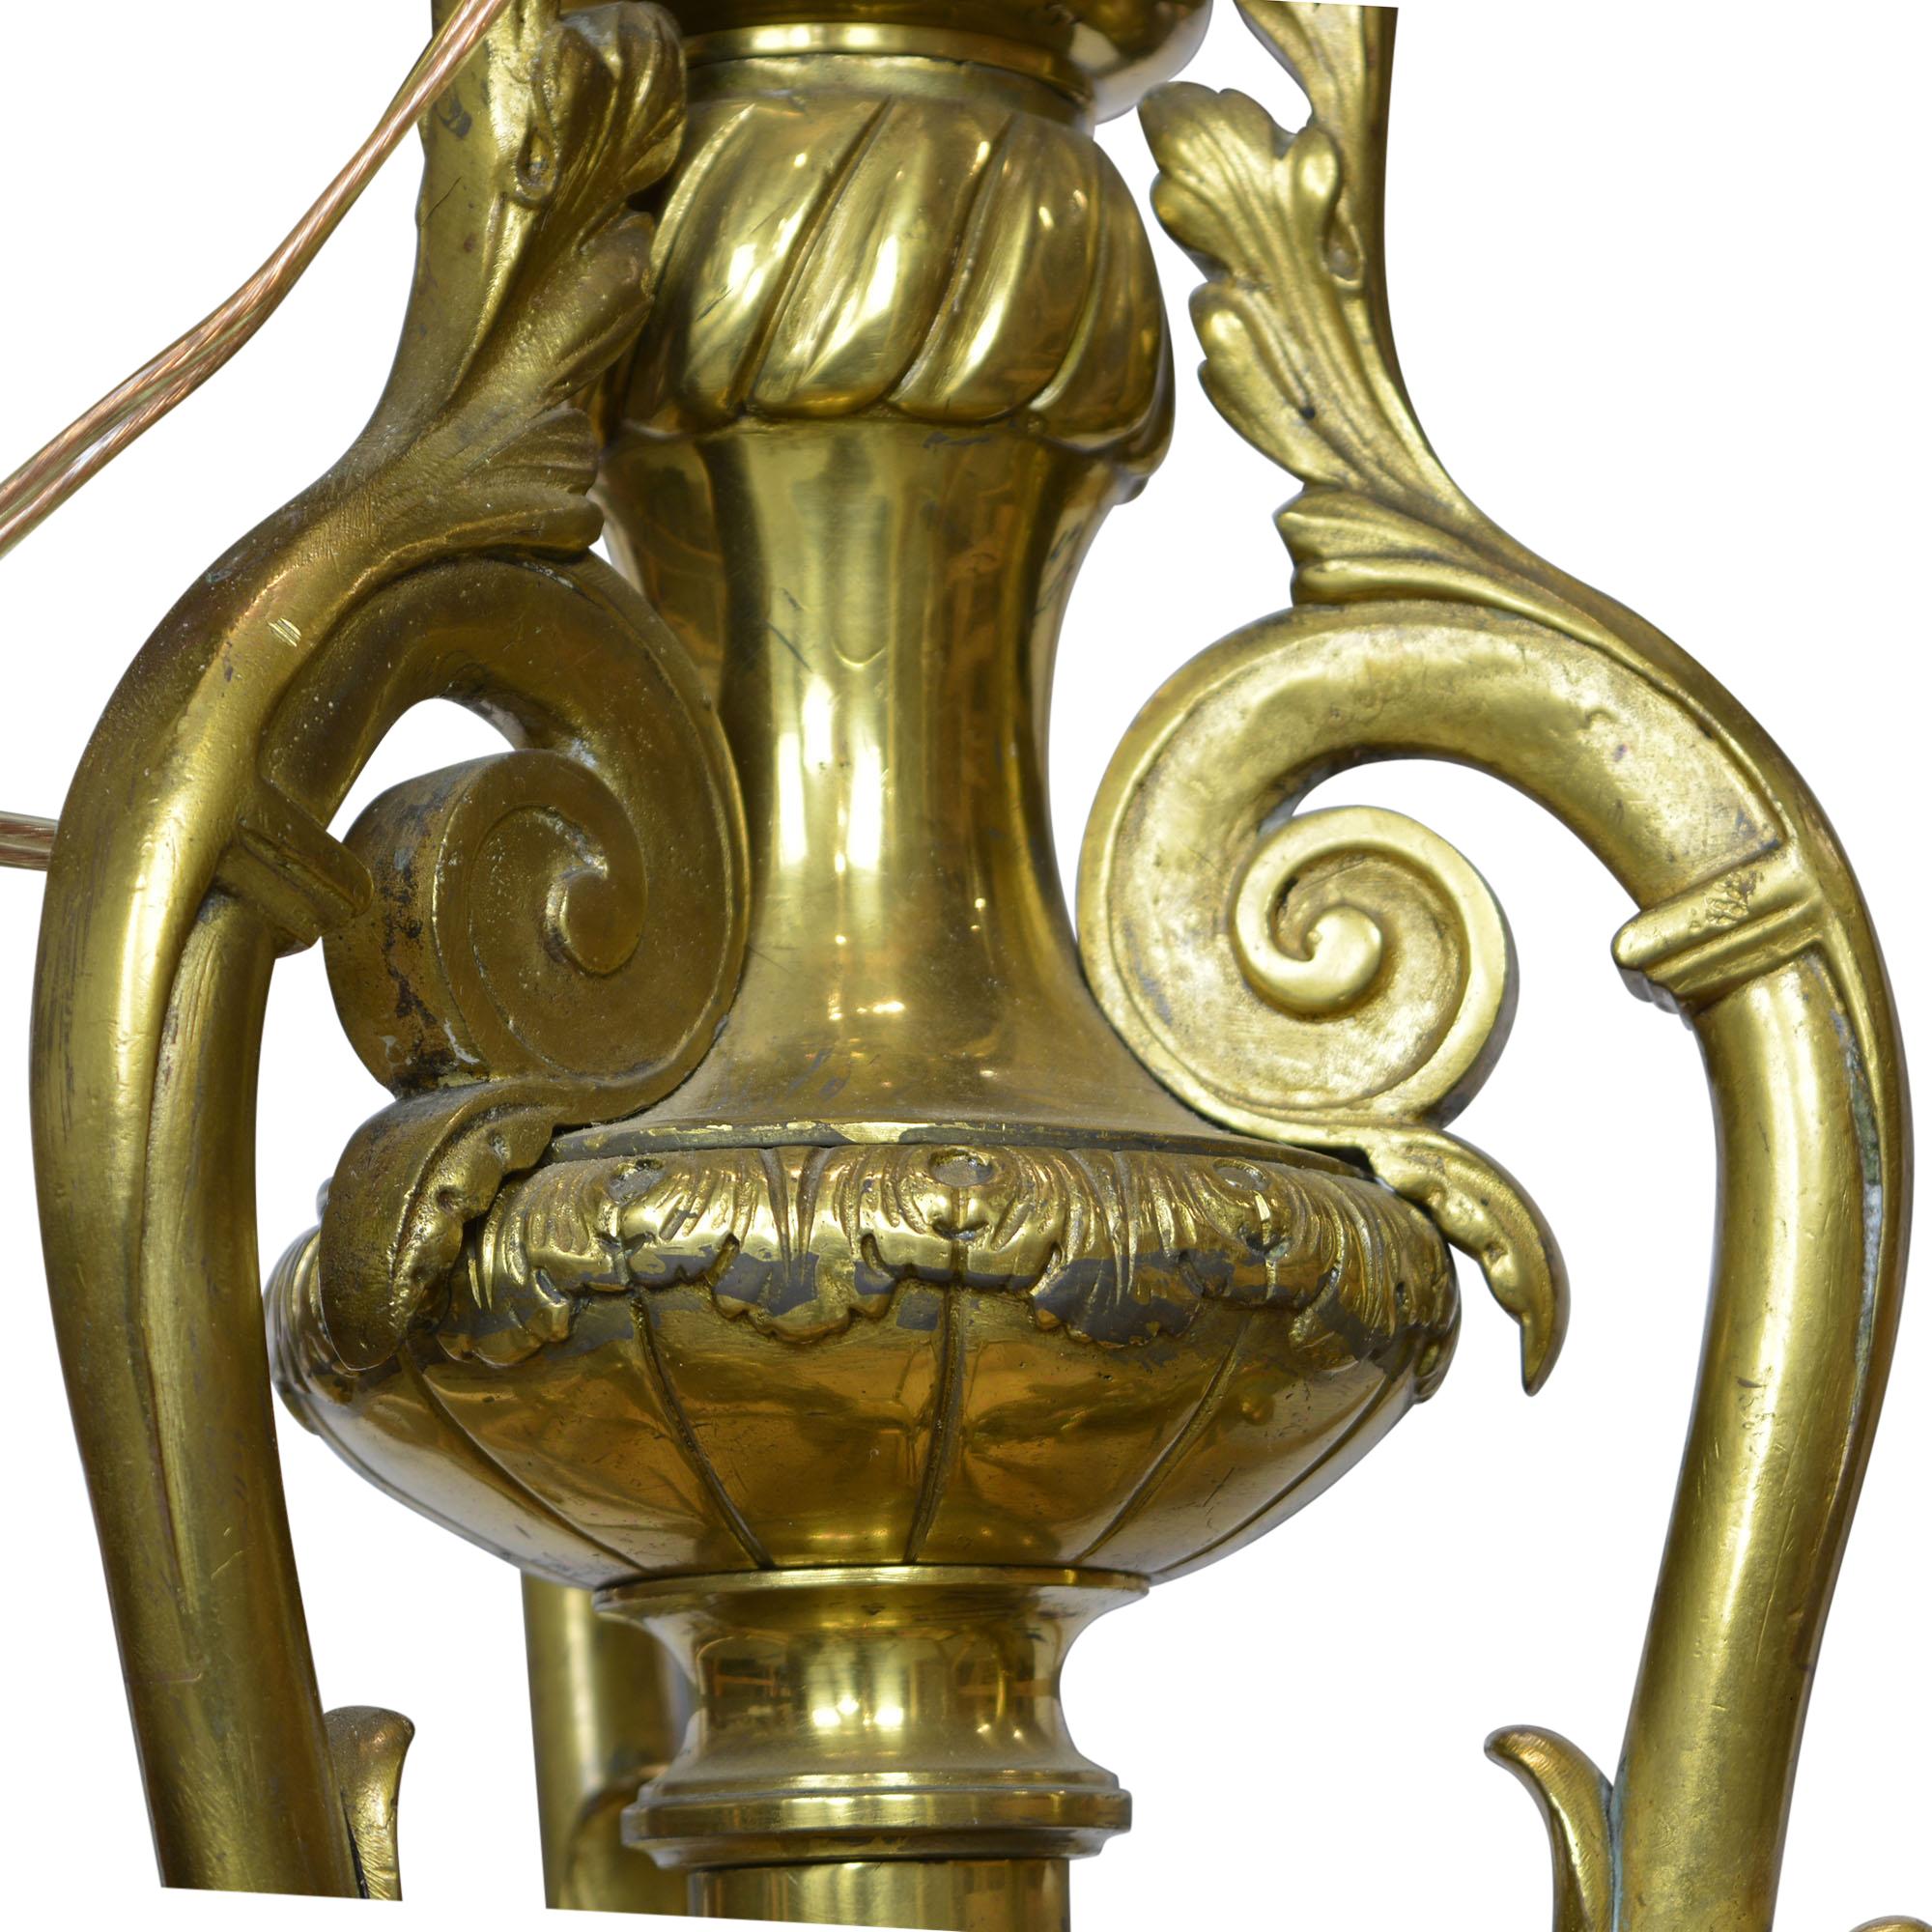 Napoleon III Brass Chandelier with Griffon Adorned Arms 9 Lights In Fair Condition For Sale In Pataskala, OH